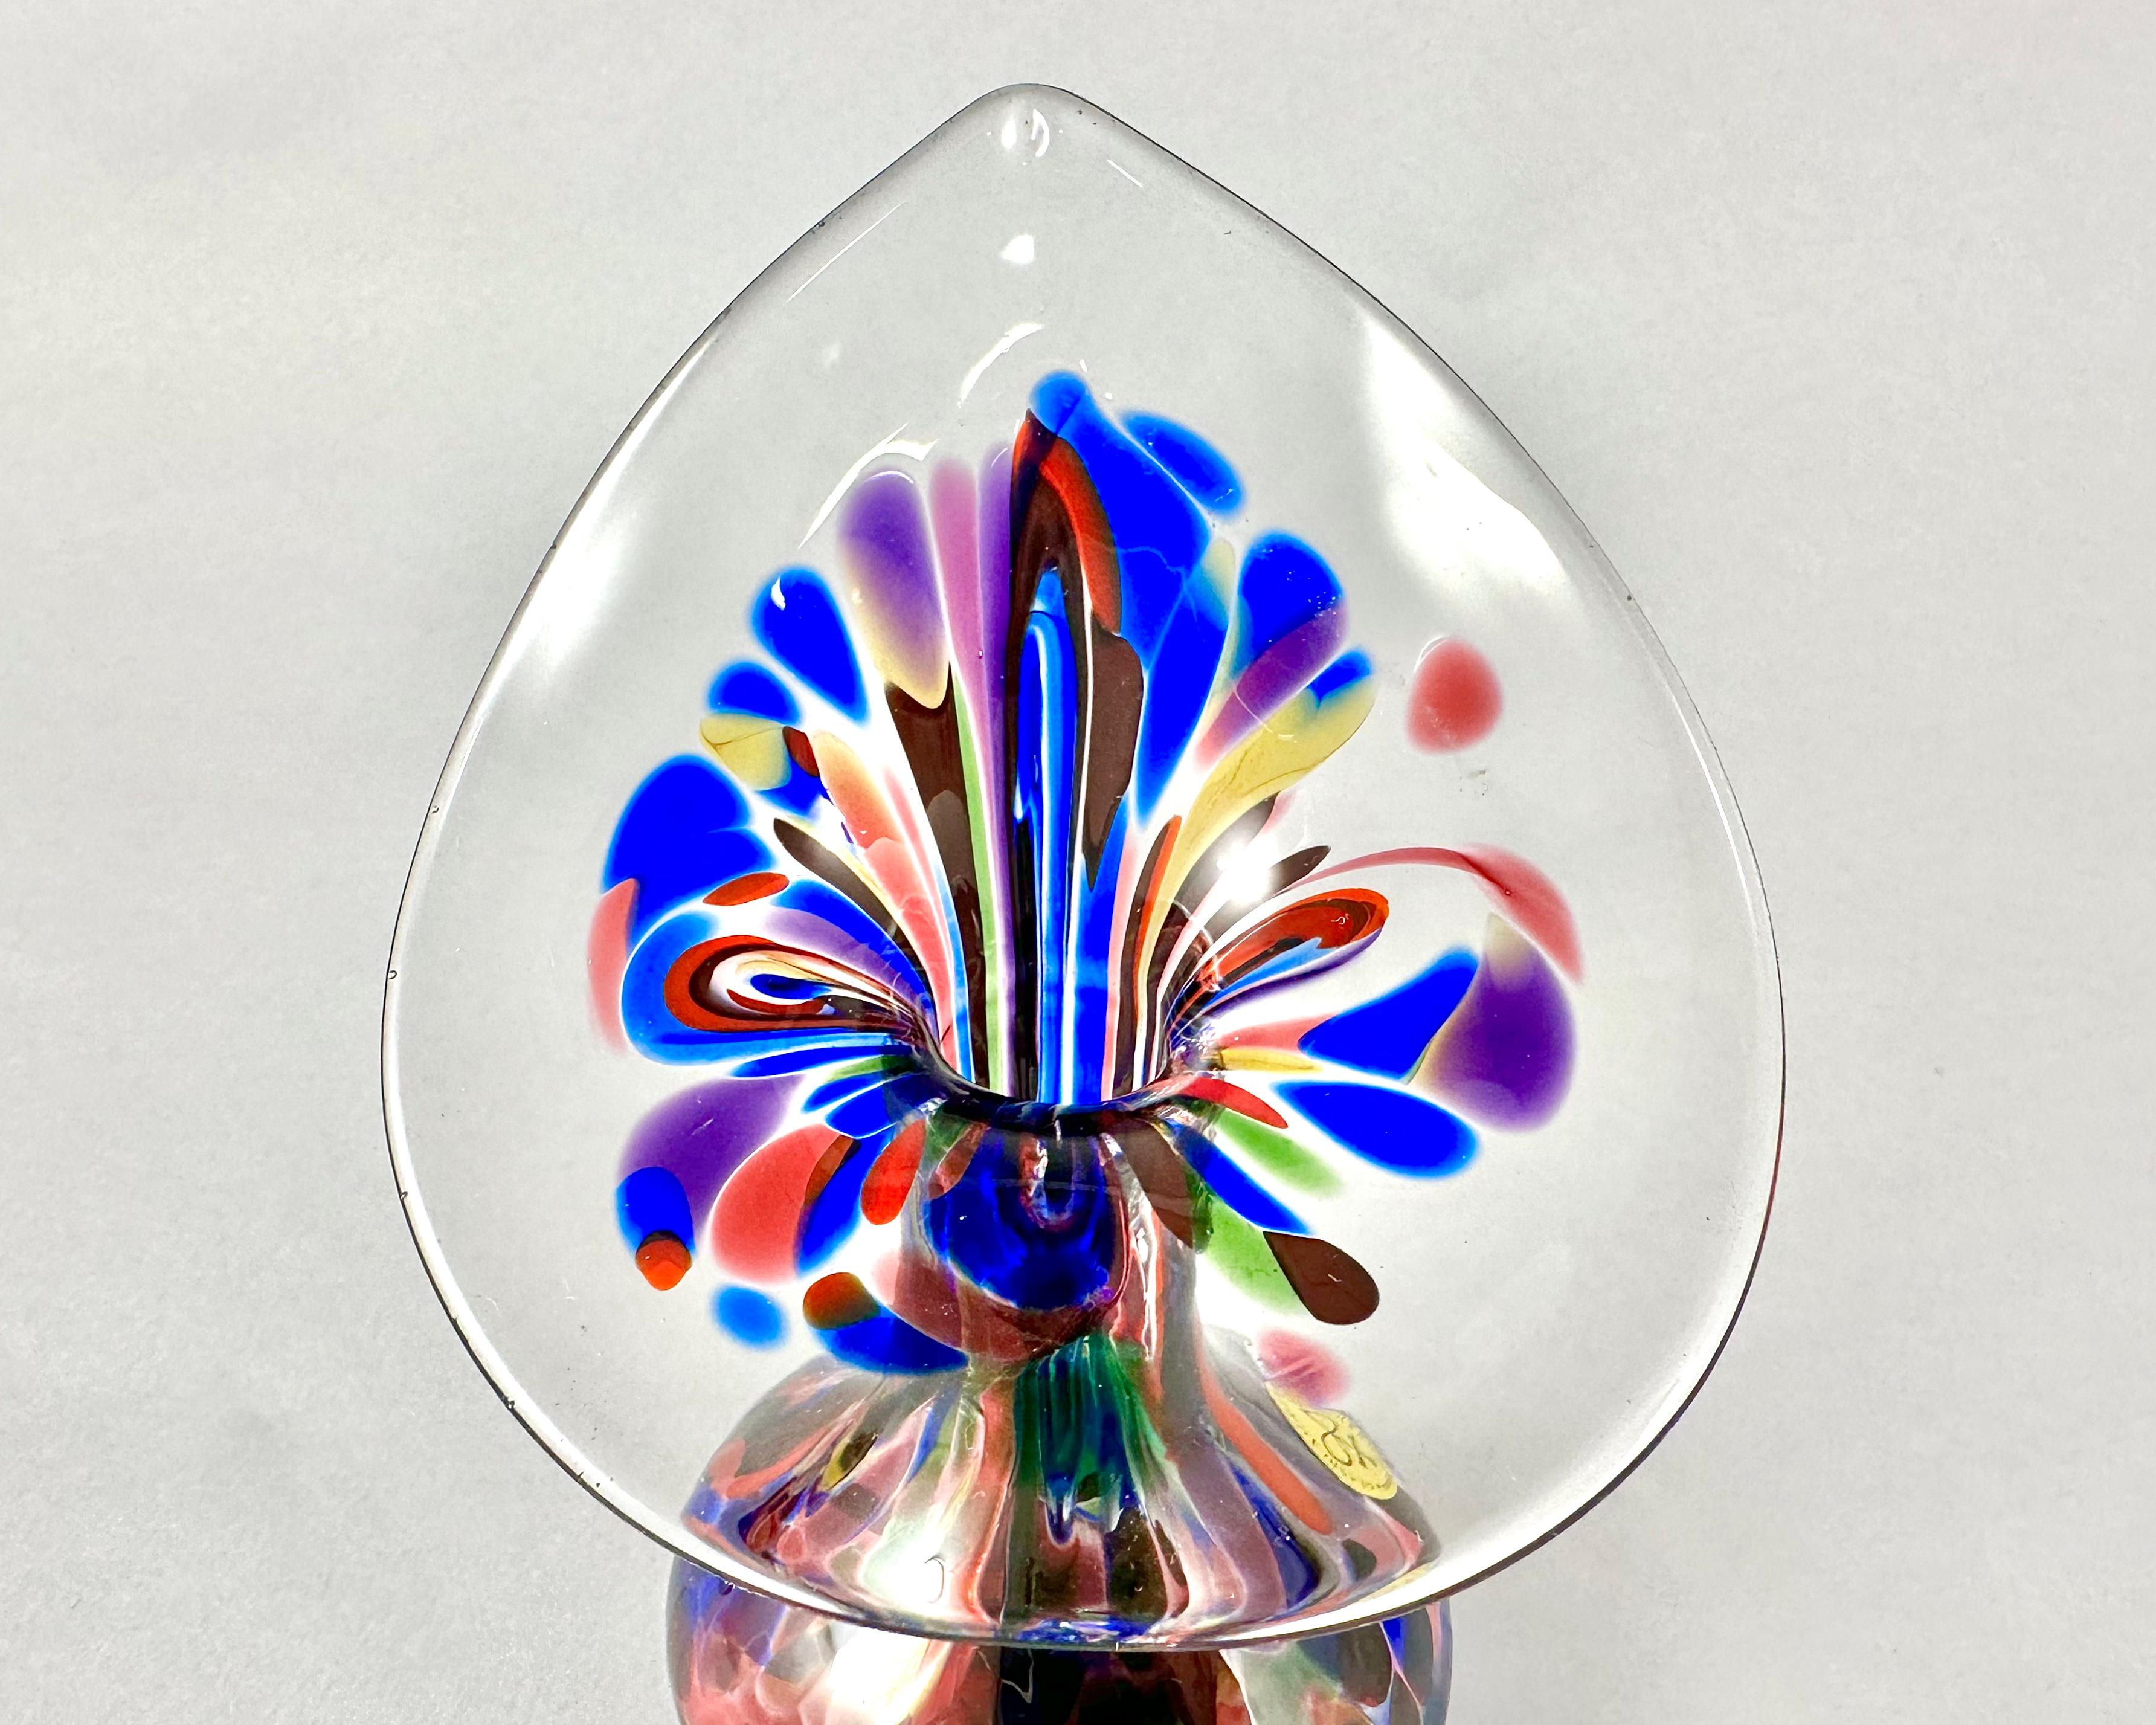 Hand Blown Multi-Color Vase Glasbläserei Heimbach, Germany In Excellent Condition For Sale In Bastogne, BE